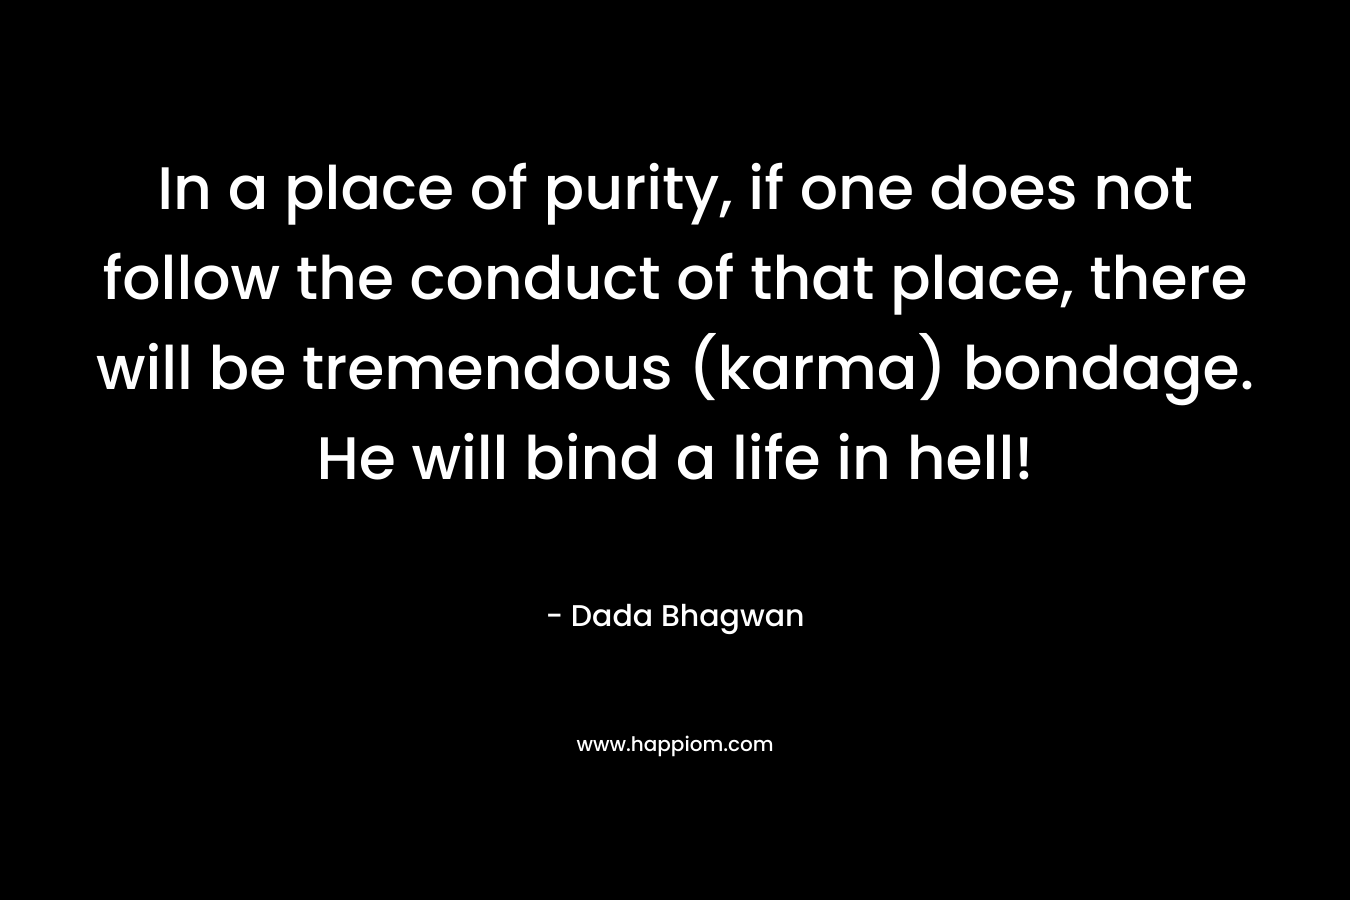 In a place of purity, if one does not follow the conduct of that place, there will be tremendous (karma) bondage. He will bind a life in hell! – Dada Bhagwan